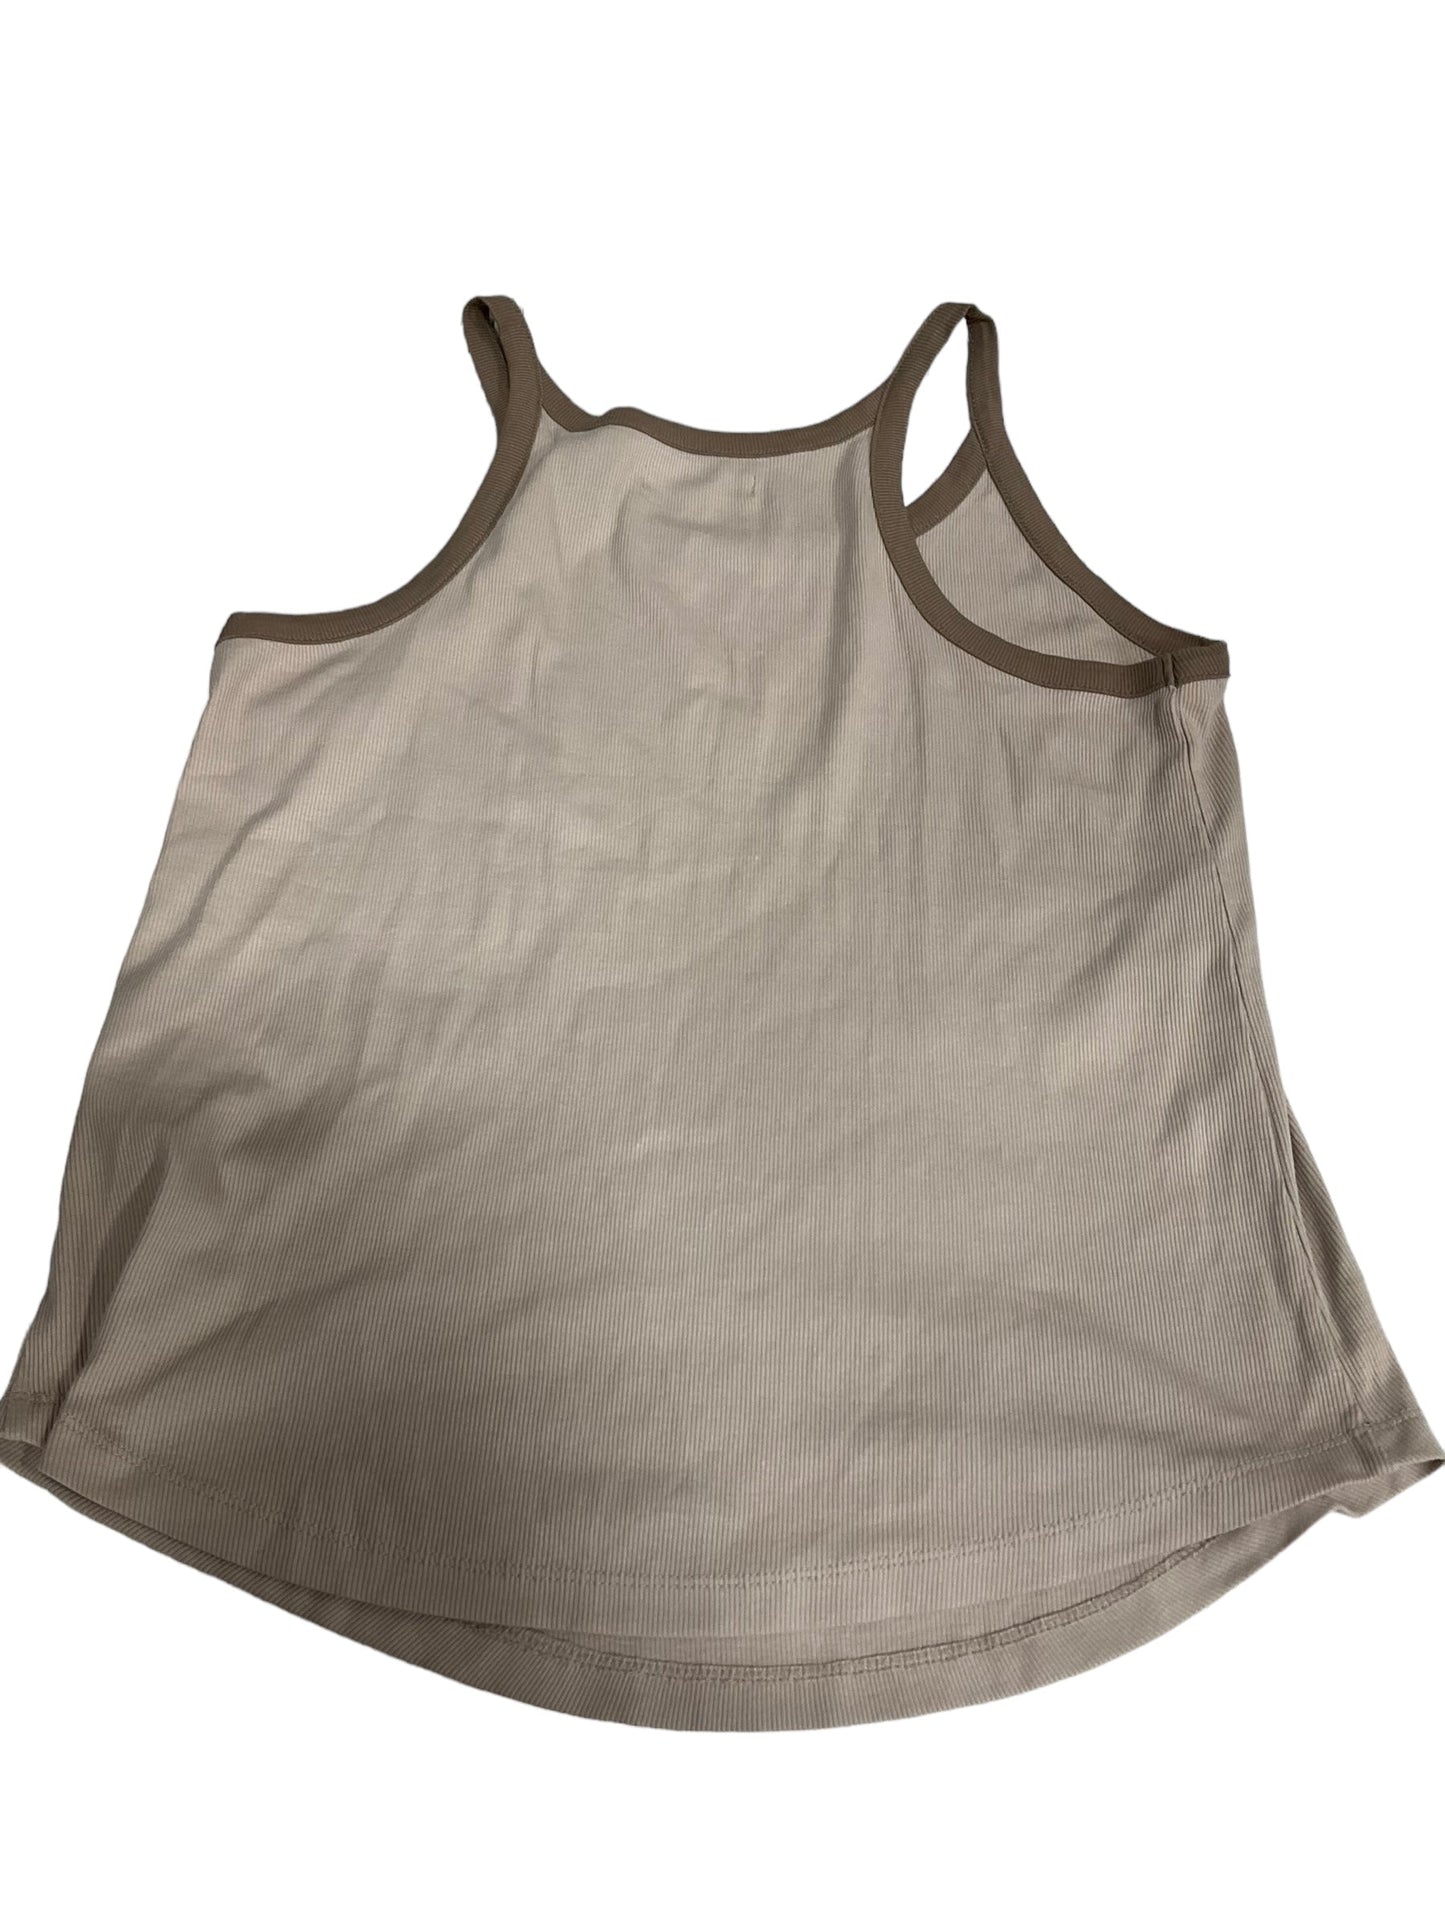 Brown Tank Top Madewell, Size 1x